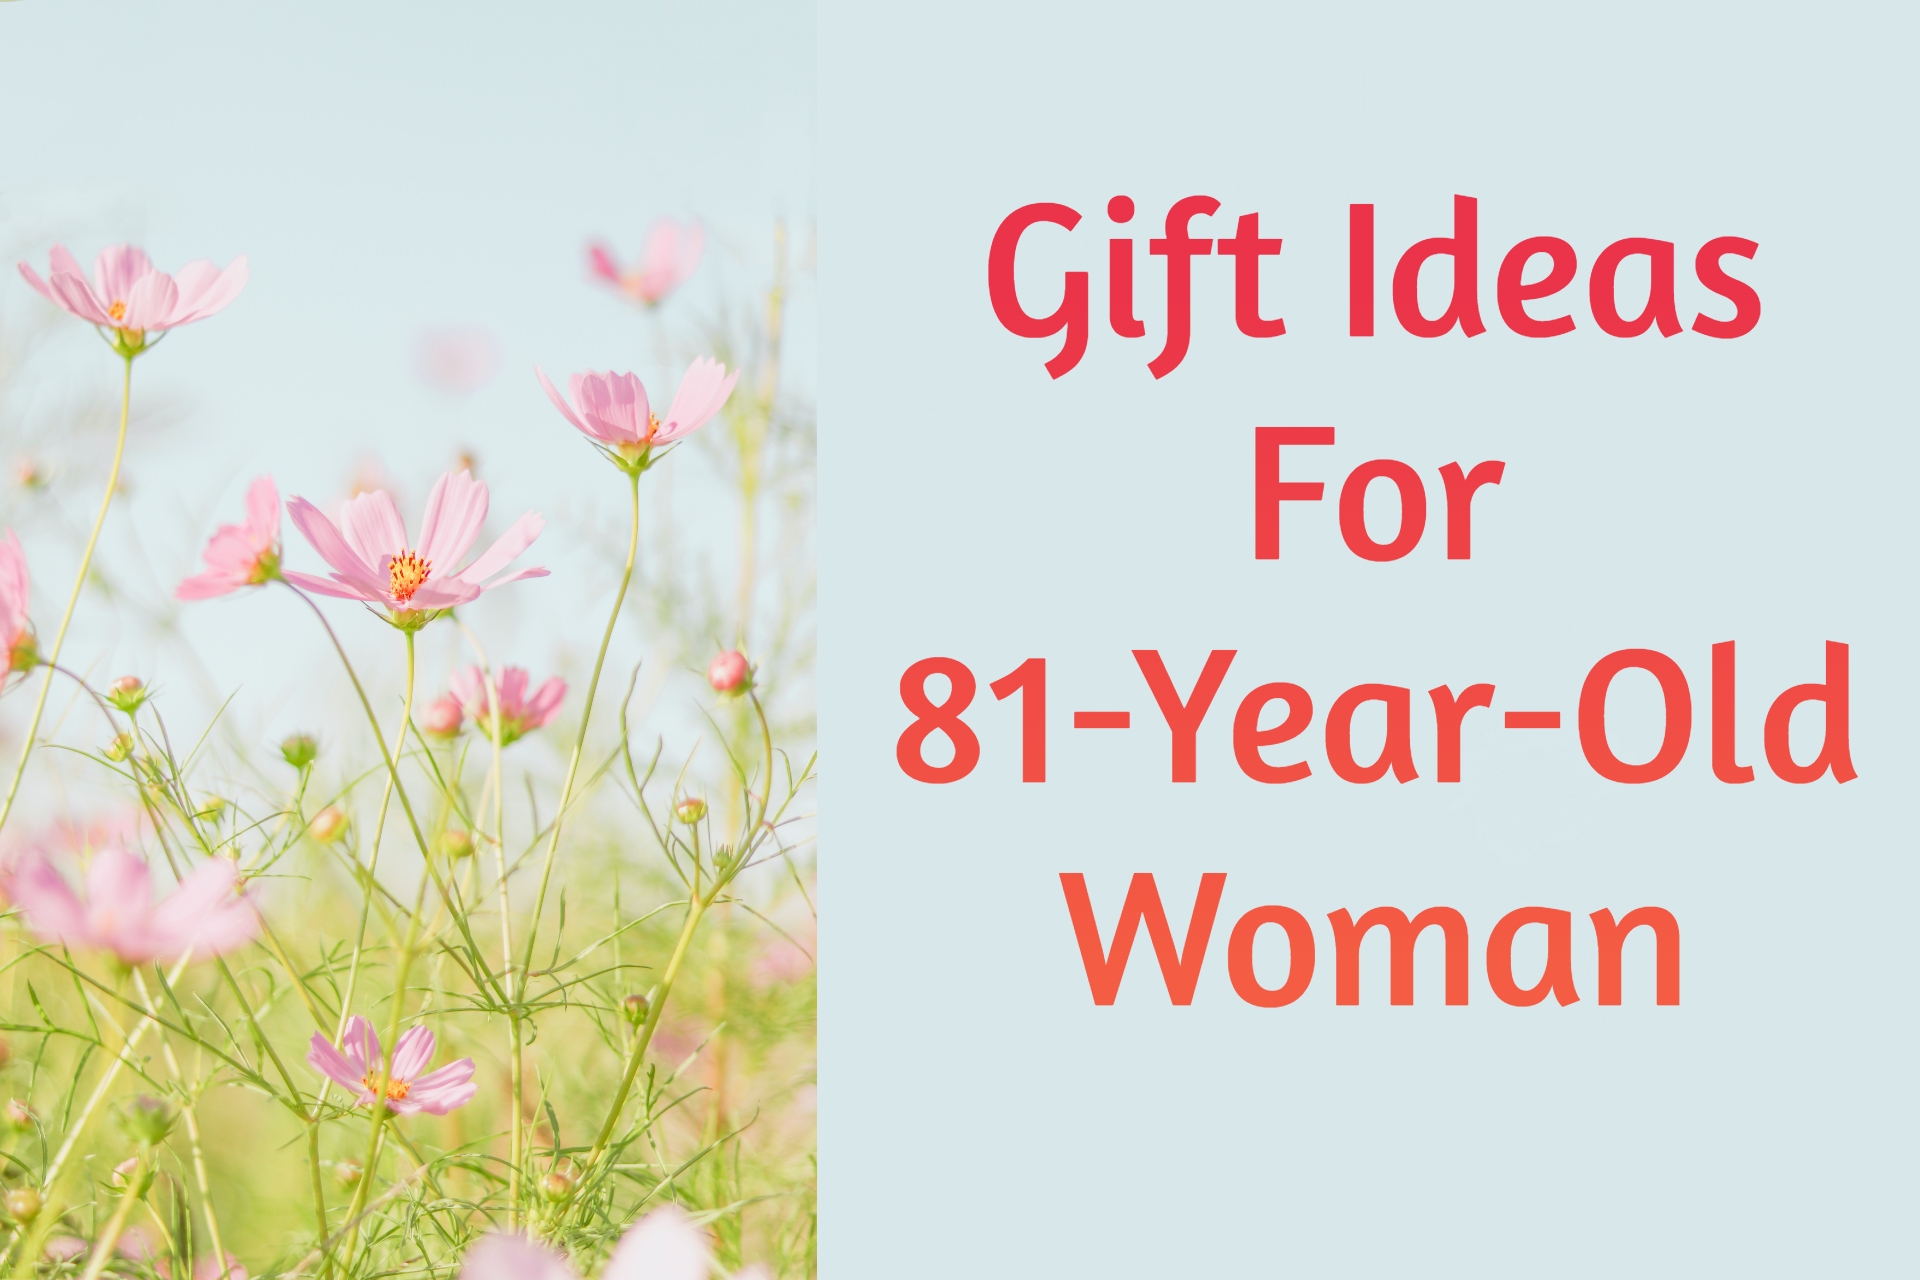 Cover image of gift ideas for 81-year-old woman by Giftsedge